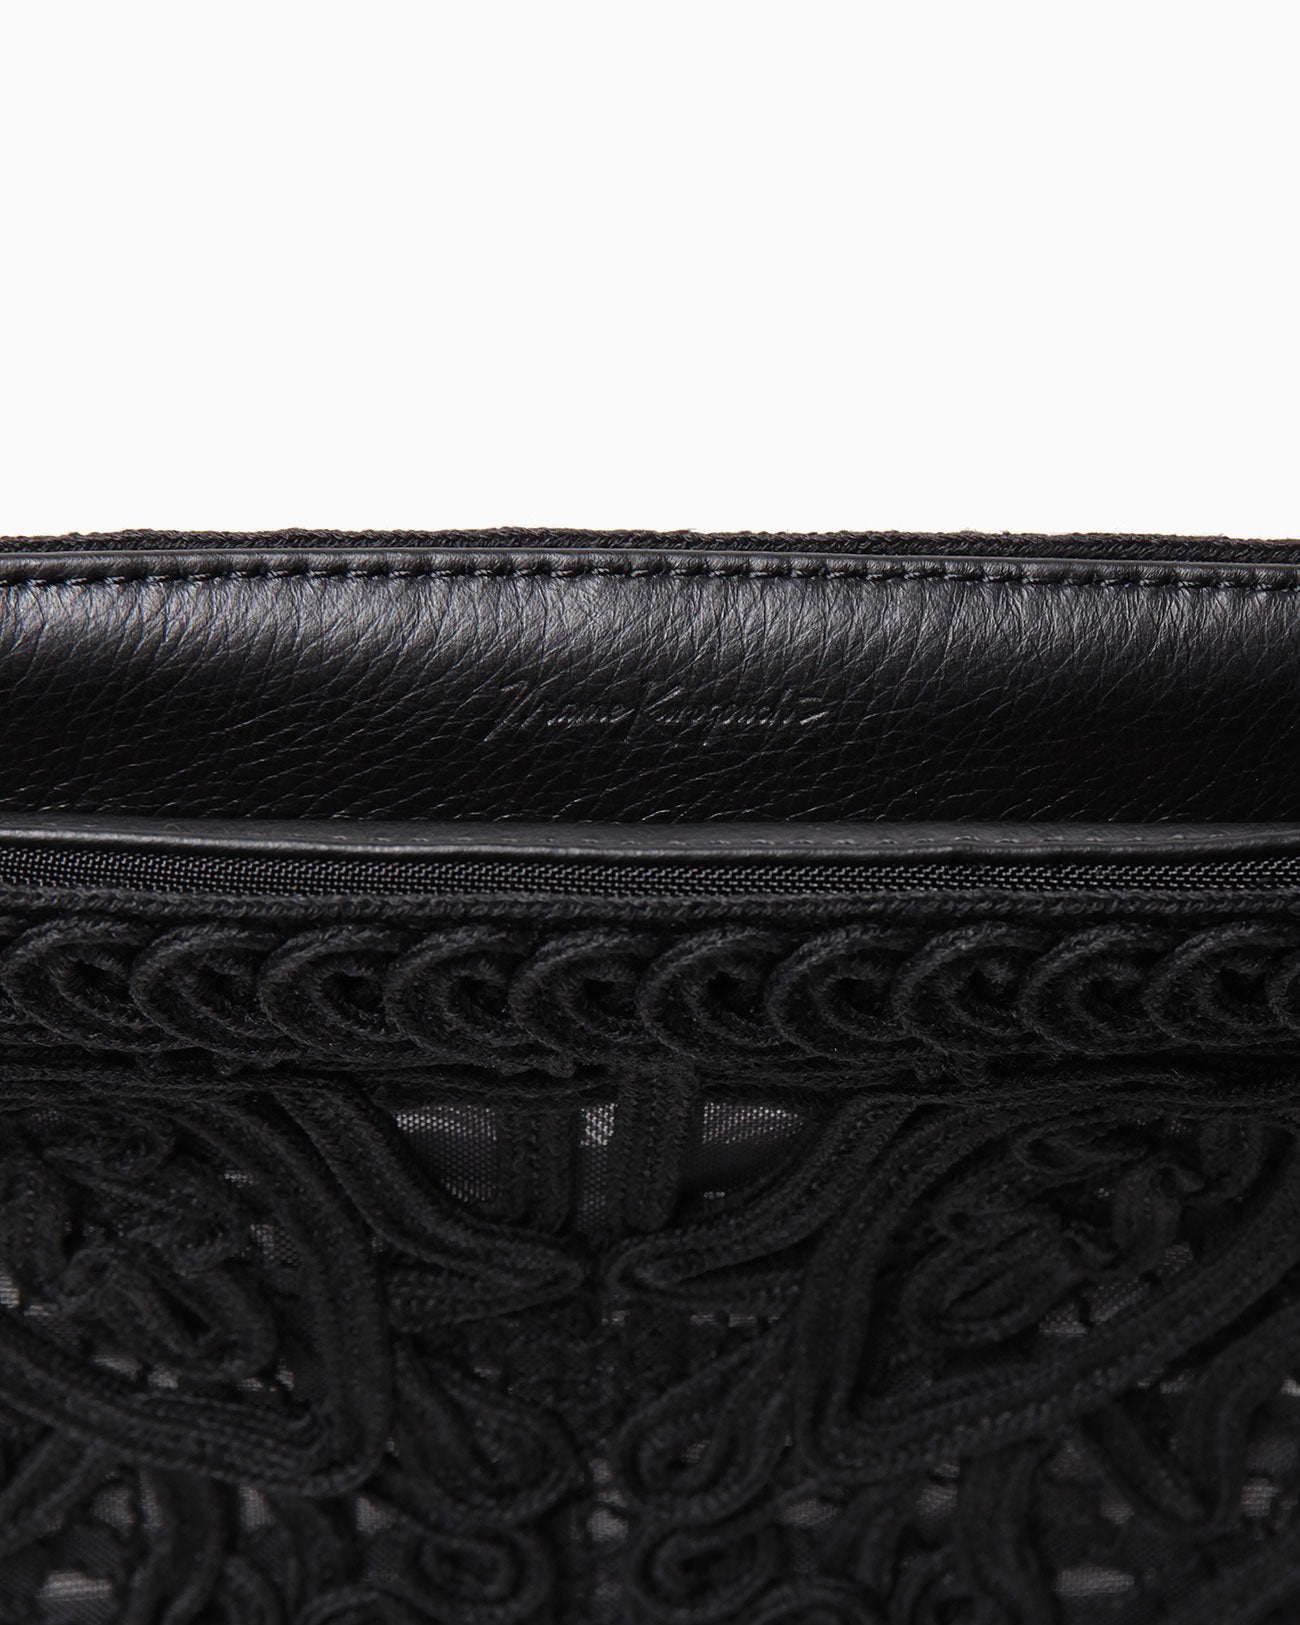 Cording Embroidery Pouch With Leather Strap - black - Mame Kurogouchi